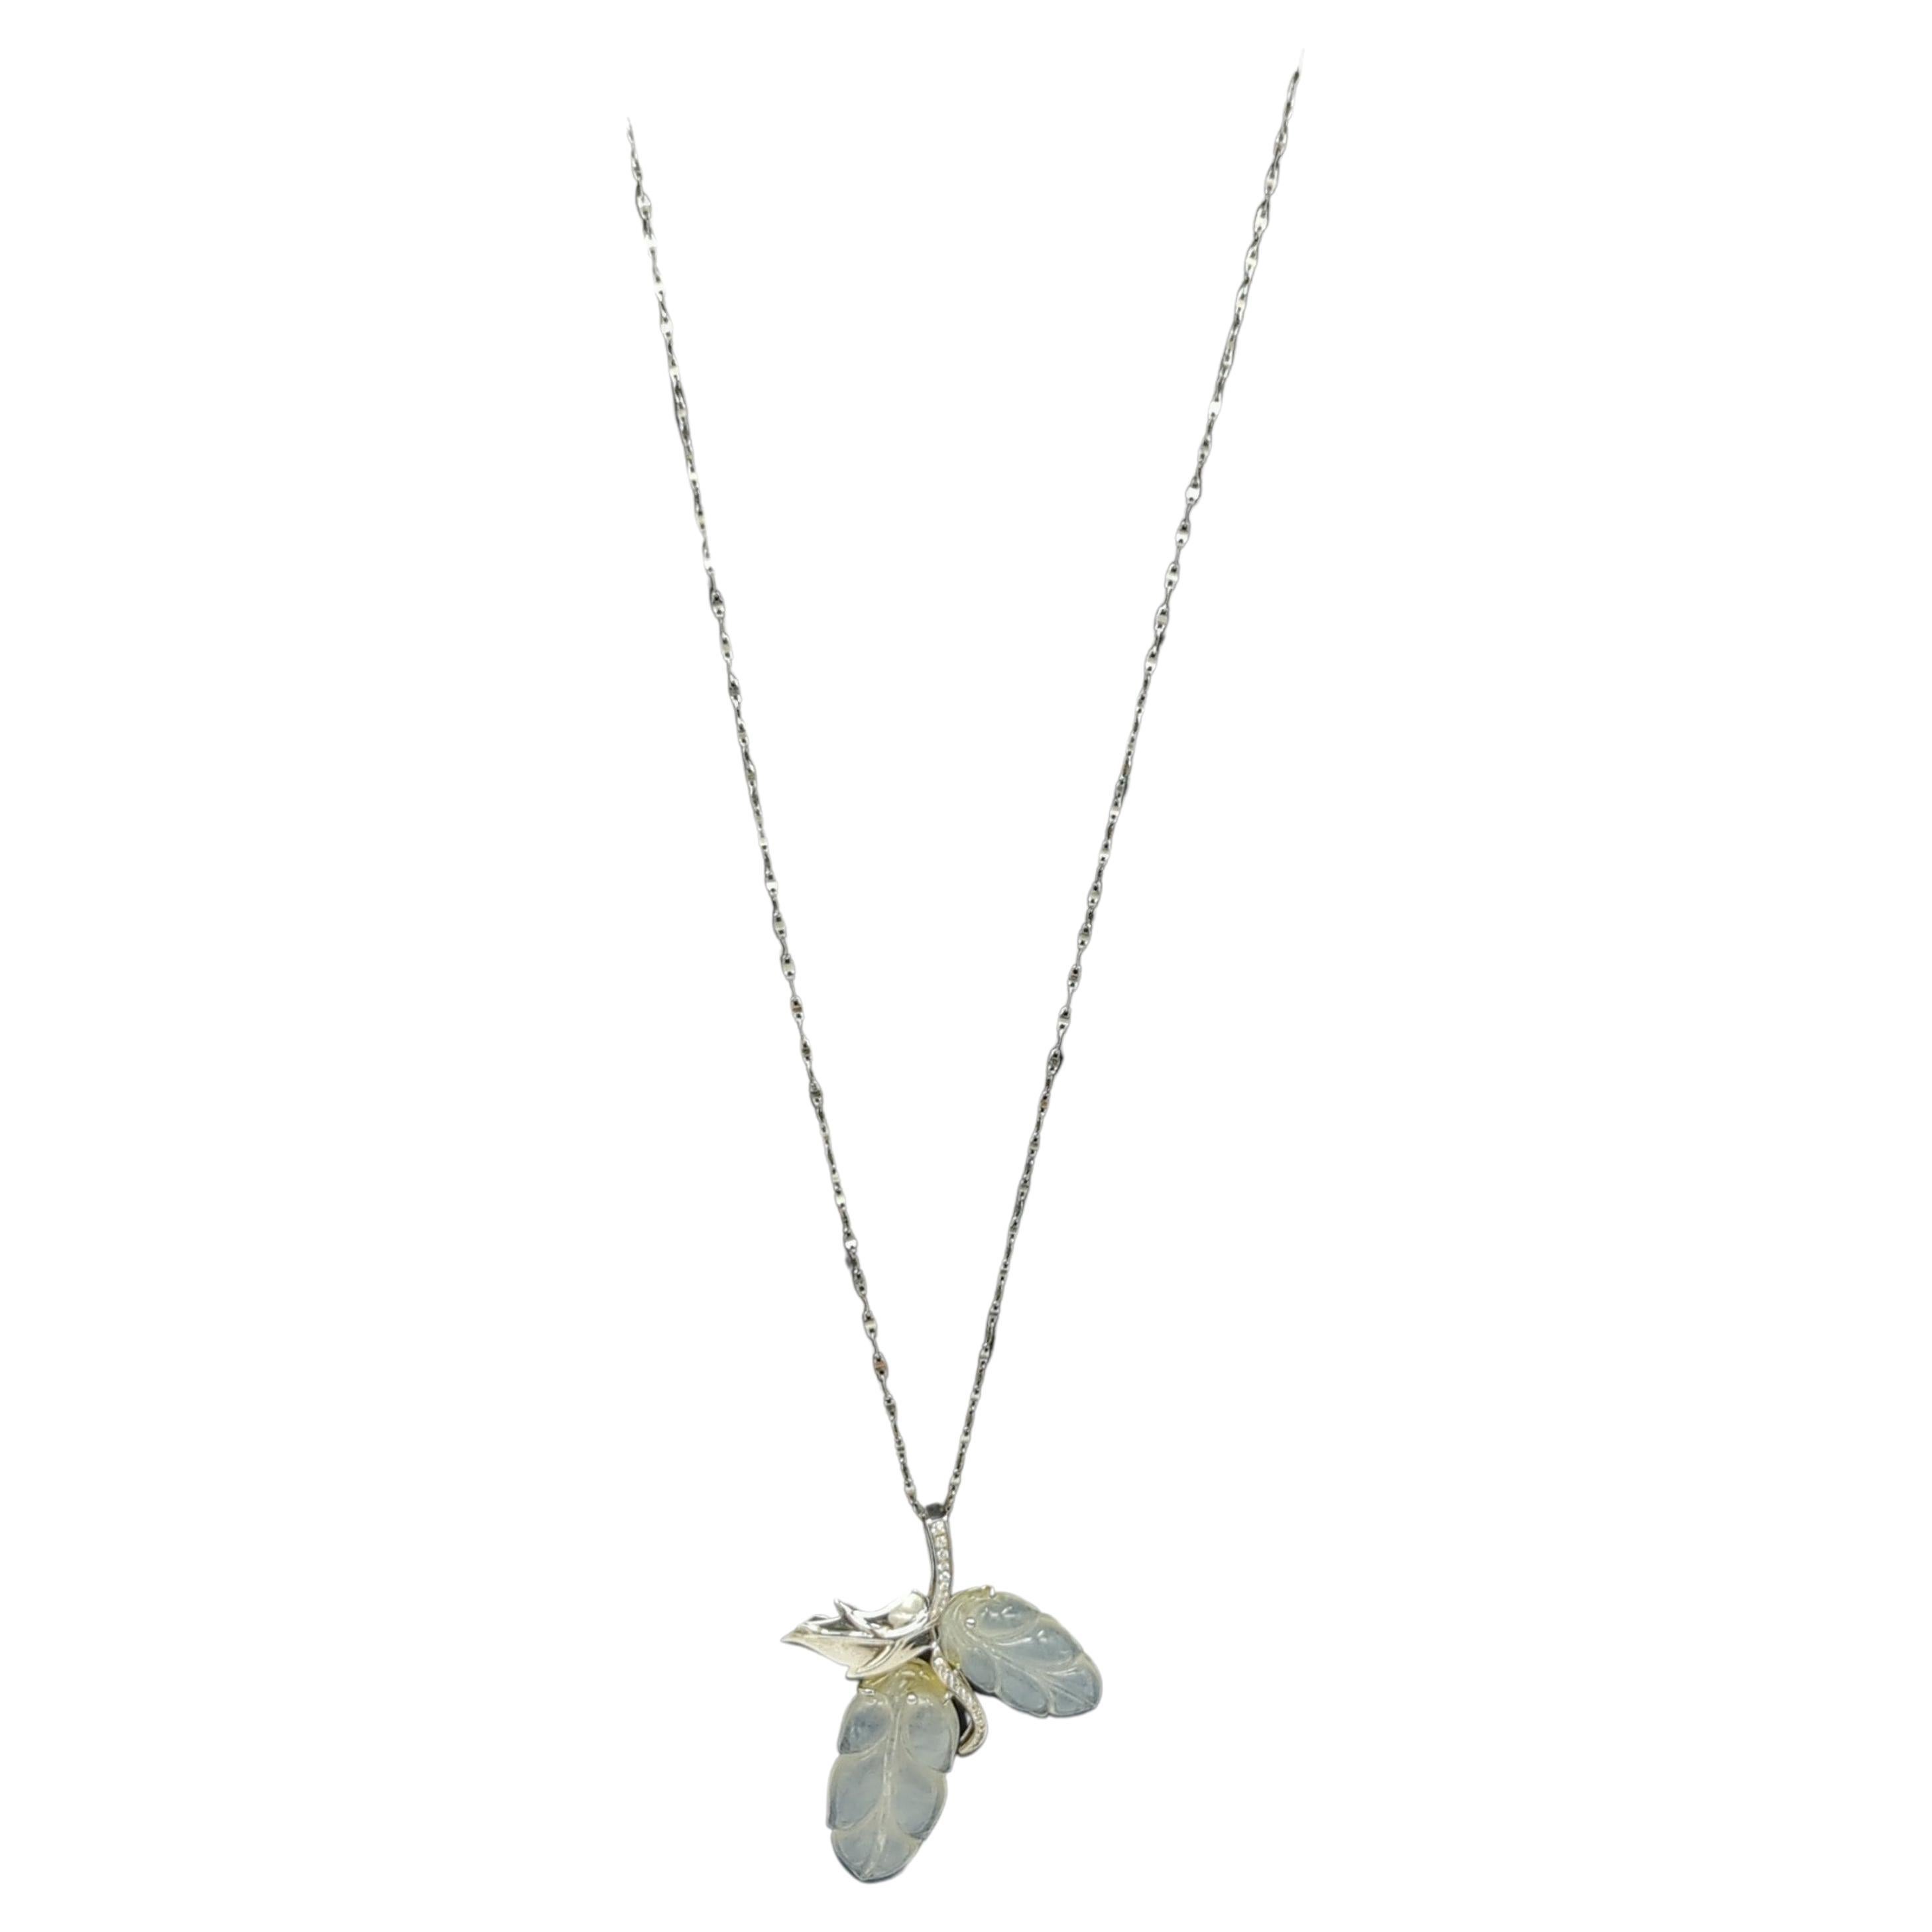 This elegant ladies' pendant is a masterful blend of craftsmanship and design, featuring 18K white gold and set with two handcrafted icy white jadeite leaves (6.6gr). The jadeite exhibits a semi-transparent quality and is finely polished, adding a